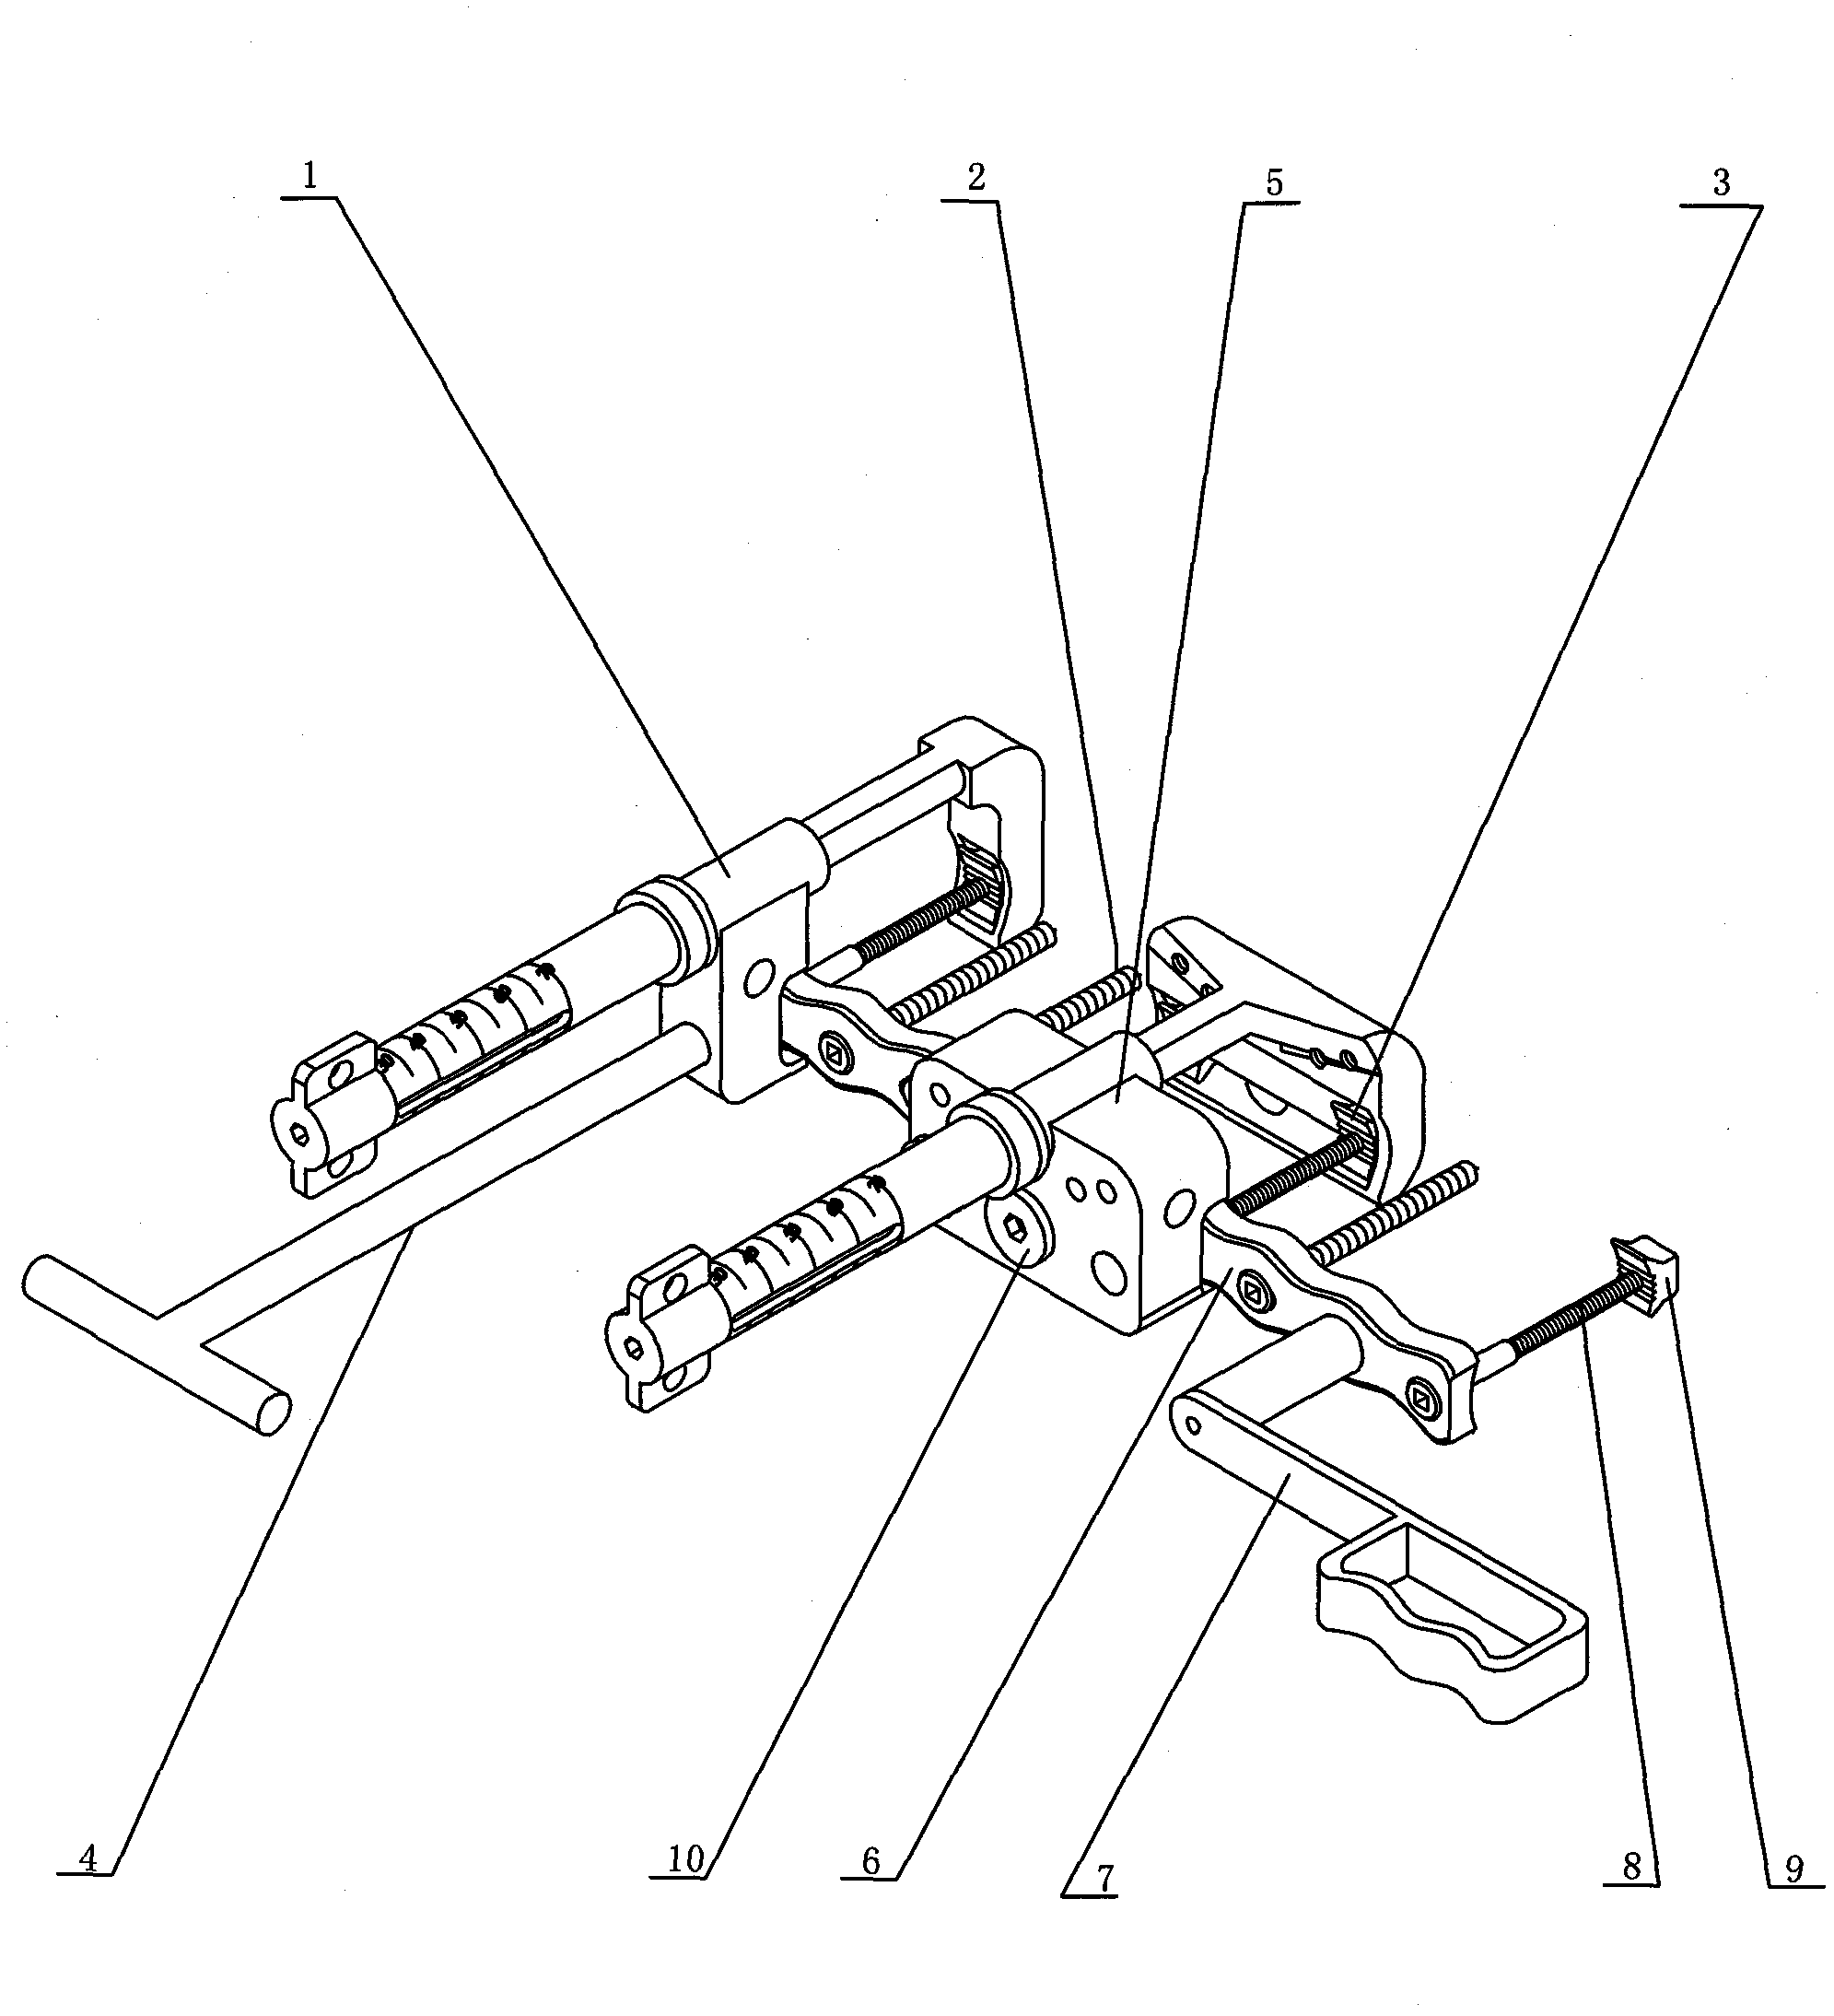 Femoral shaft fracture internally fixing instrument